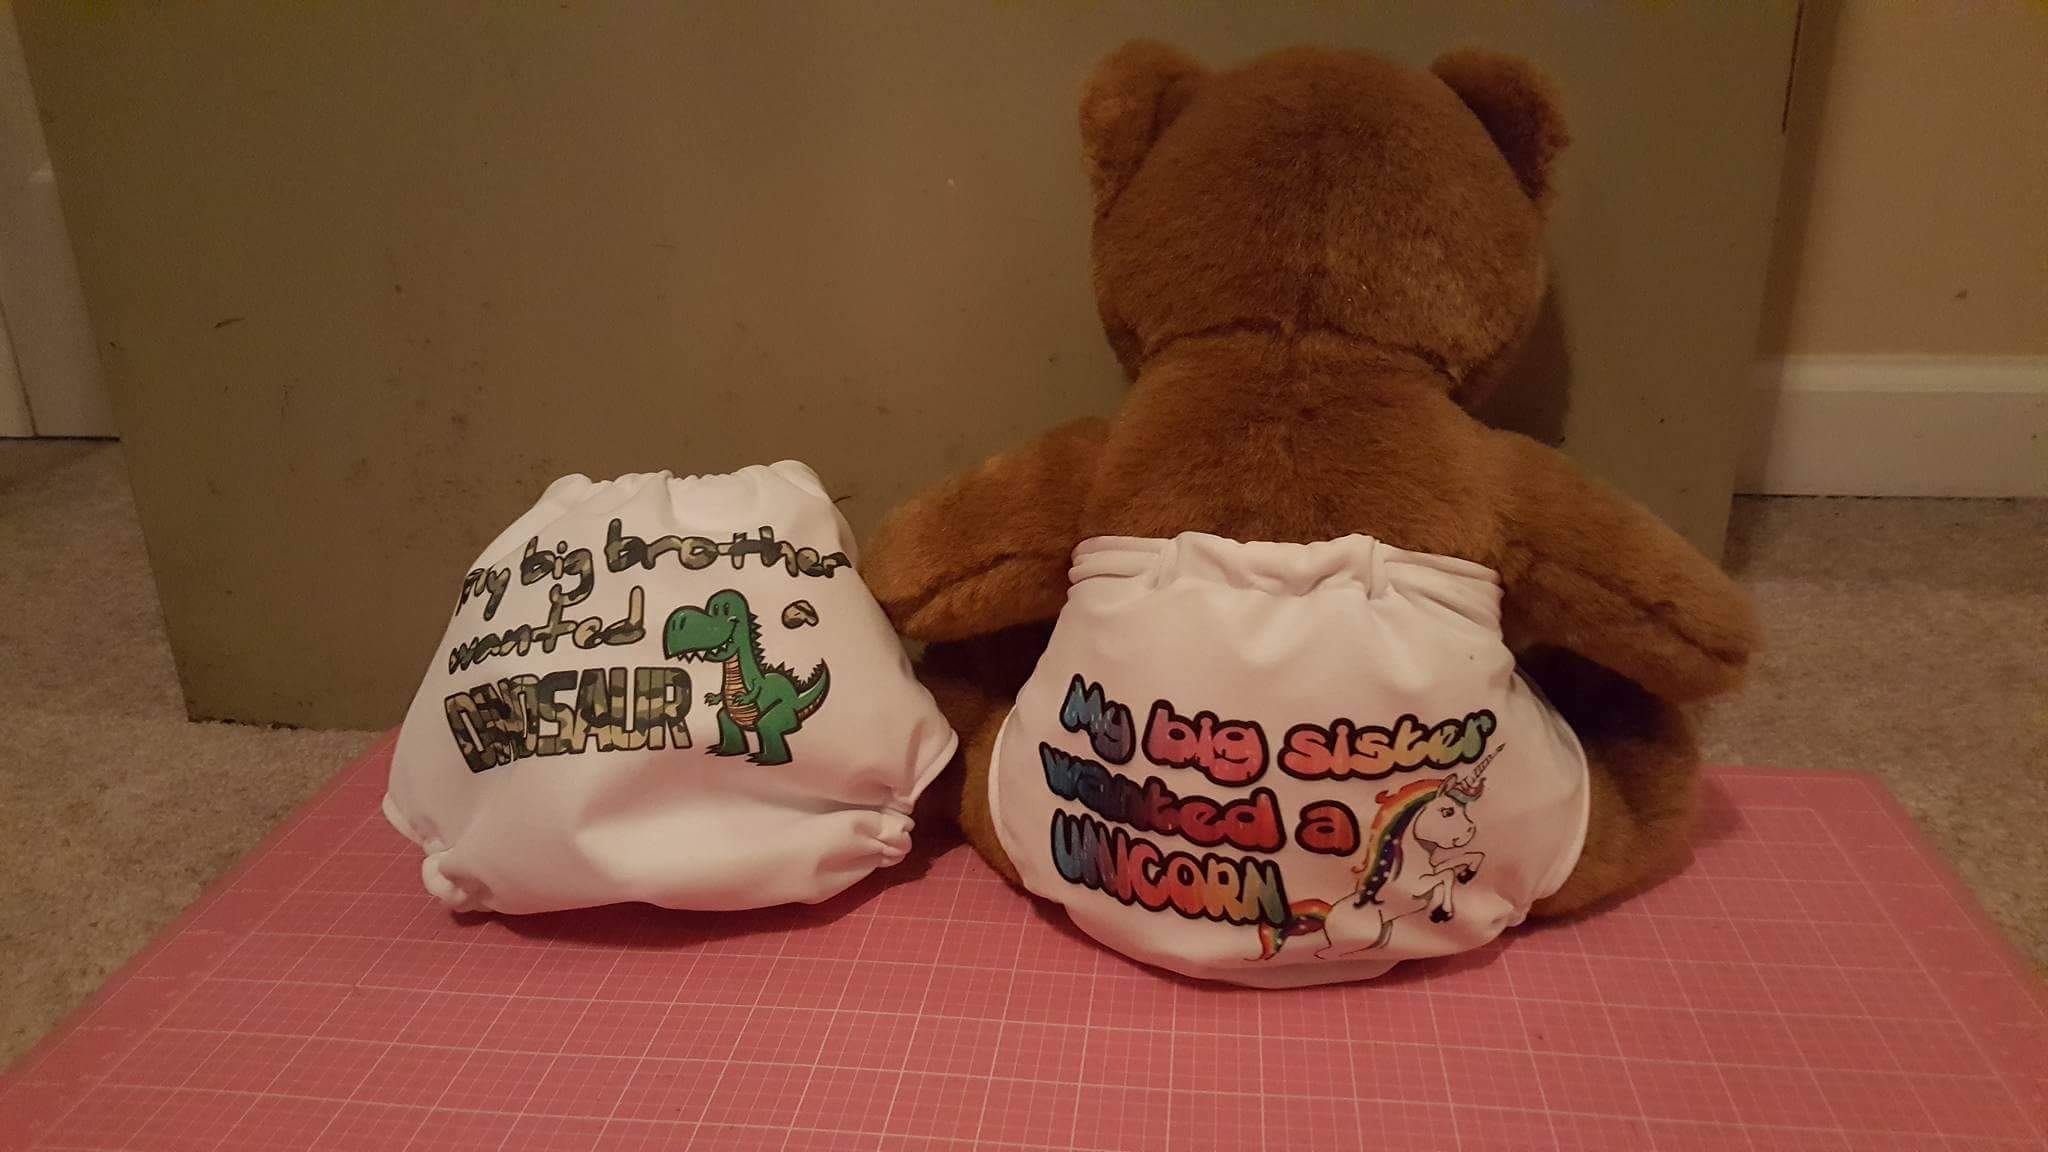 Custom printed cloth diapers, I can't wait to see what we can do with full bleed printing now t